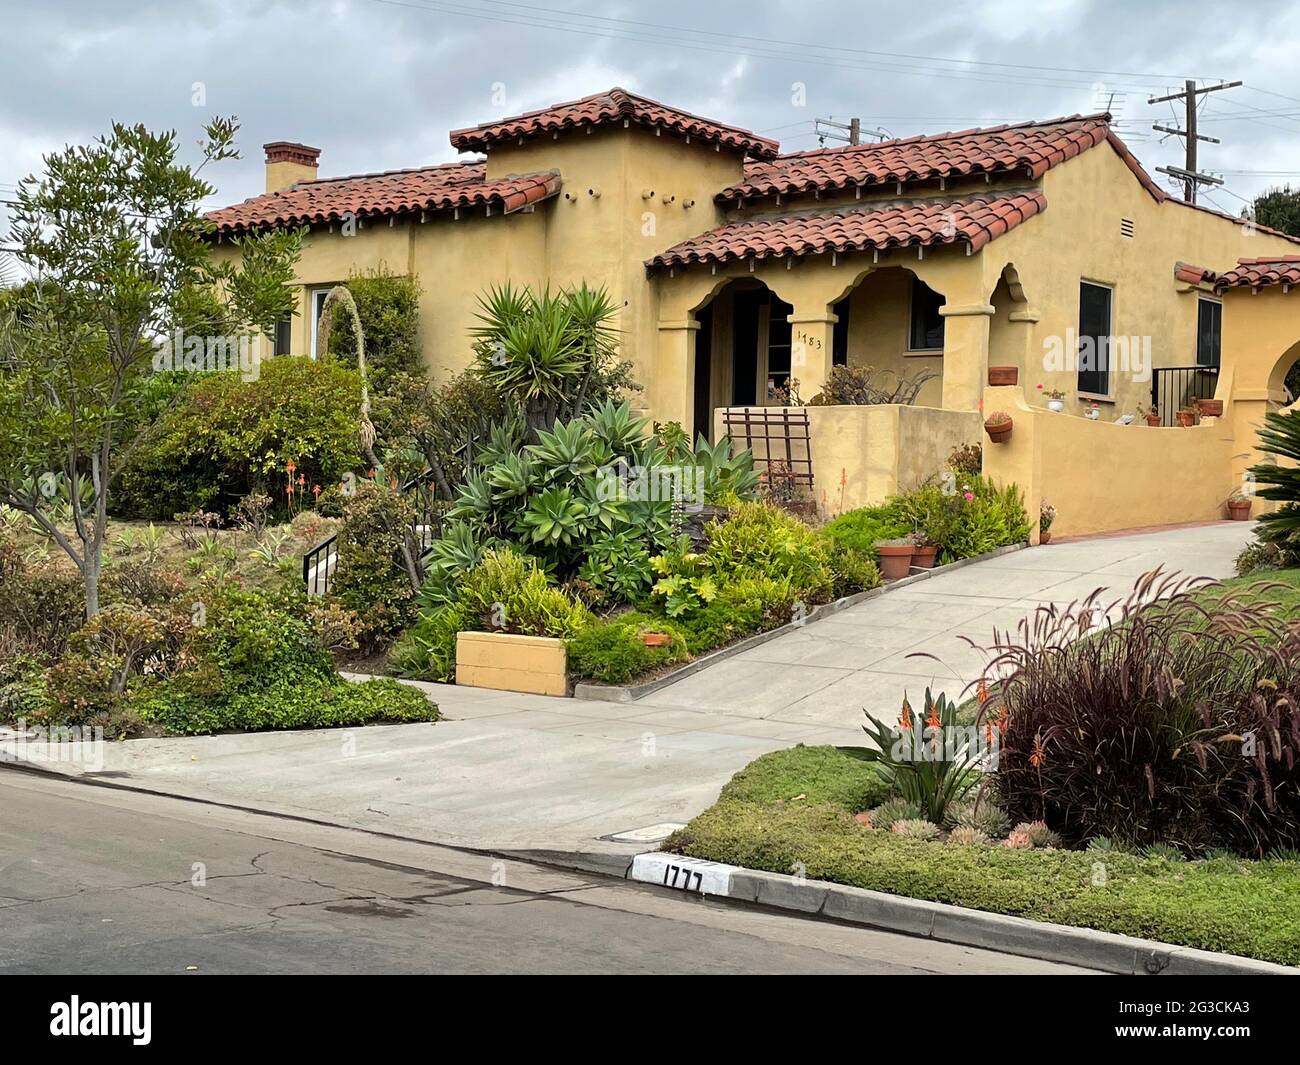 Typical Spanish style home with landscaping in Los Angeles, CA Stock Photo